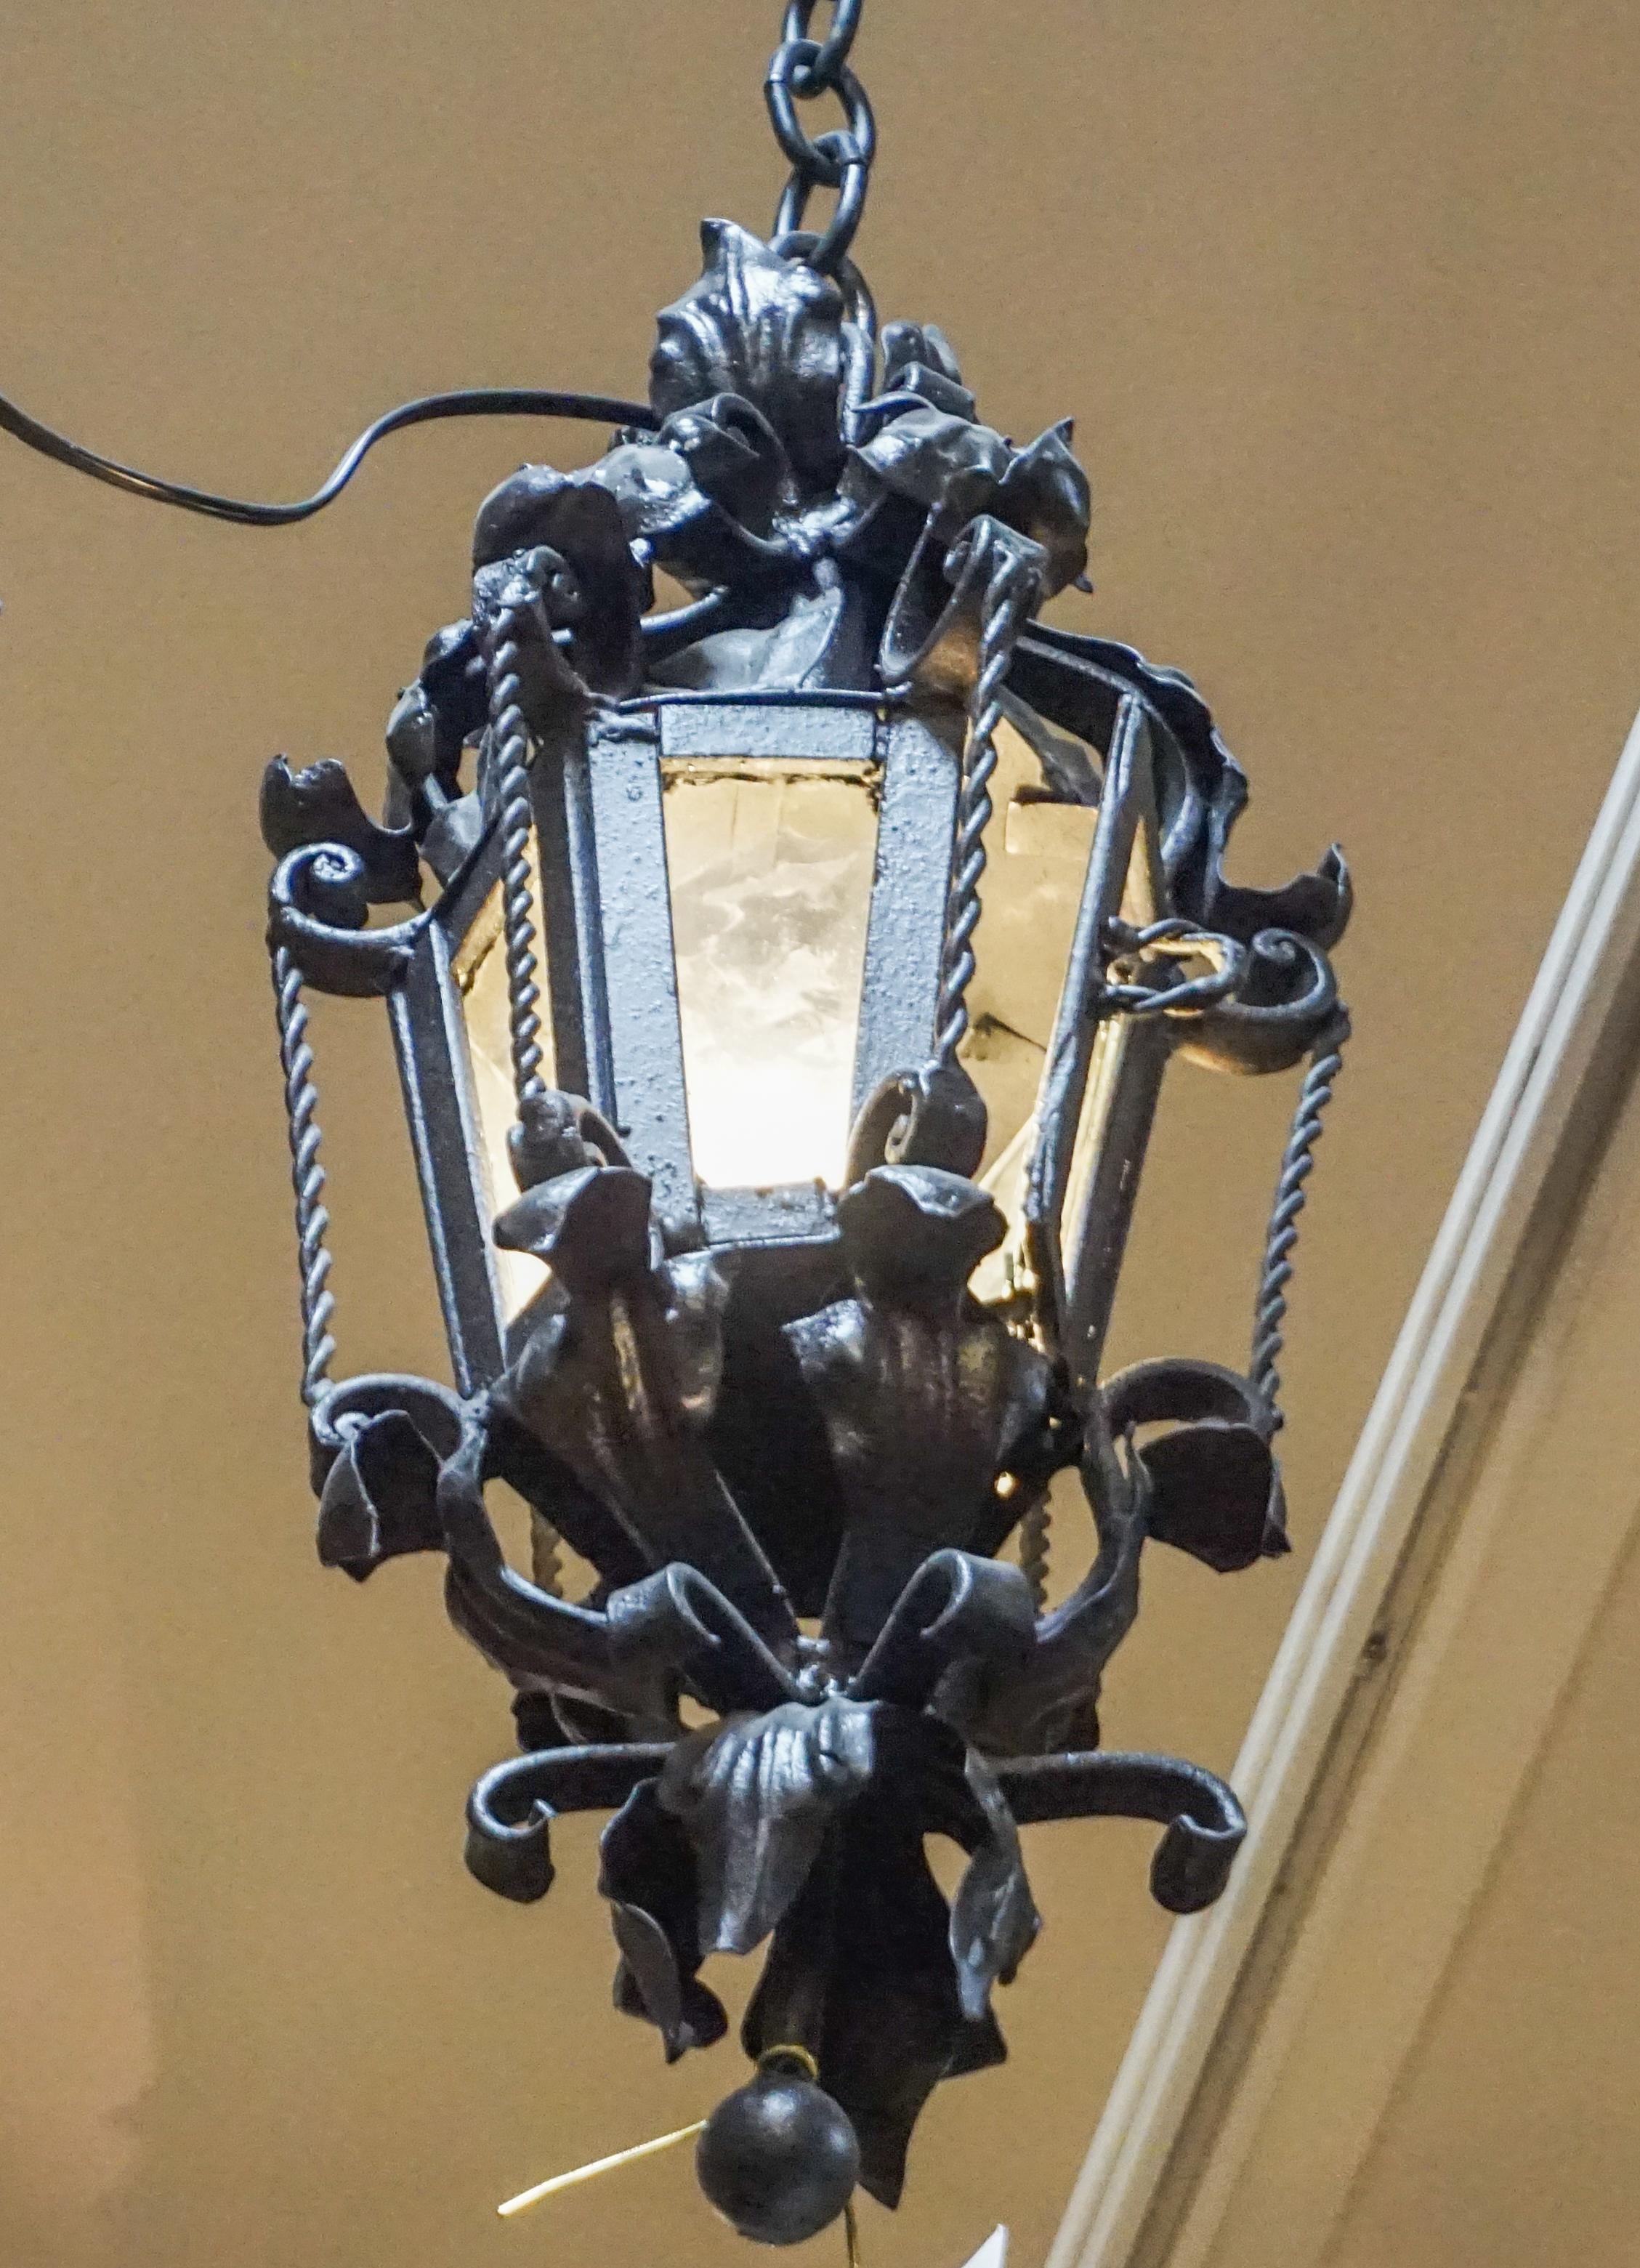 This small iron porch lantern originates from France and is wired, ready for install. 

Measurements: 9